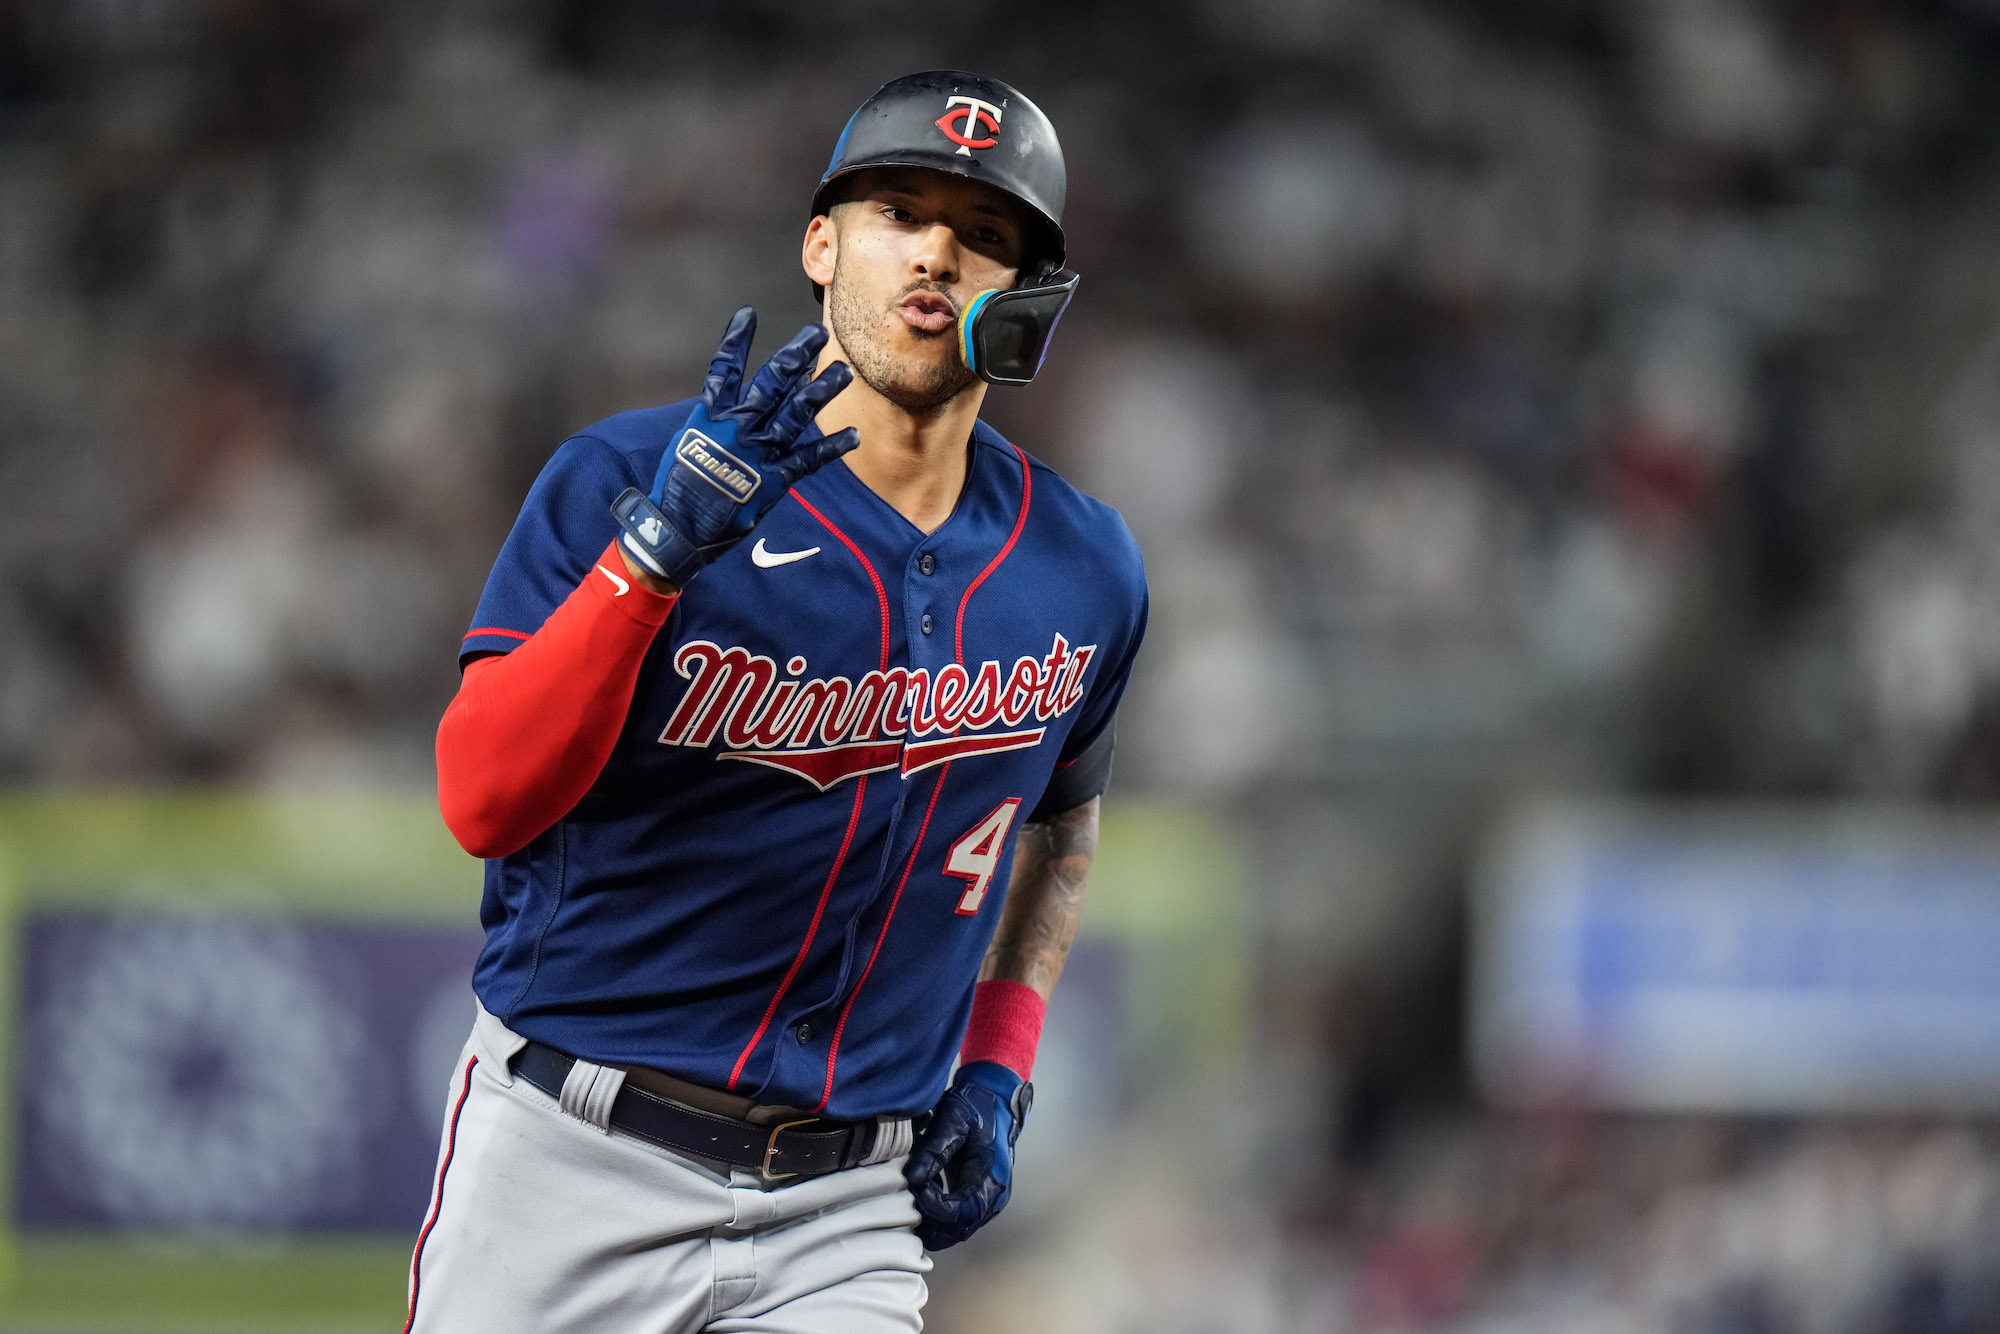 NEW YORK, NY - SEPTEMBER 08: Carlos Correa #4 of the Minnesota Twins celebrates after hitting a home run against the New York Yankees on September 8, 2022 at Yankee Stadium in New York, New York. (Photo by Brace Hemmelgarn/Minnesota Twins/Getty Images)